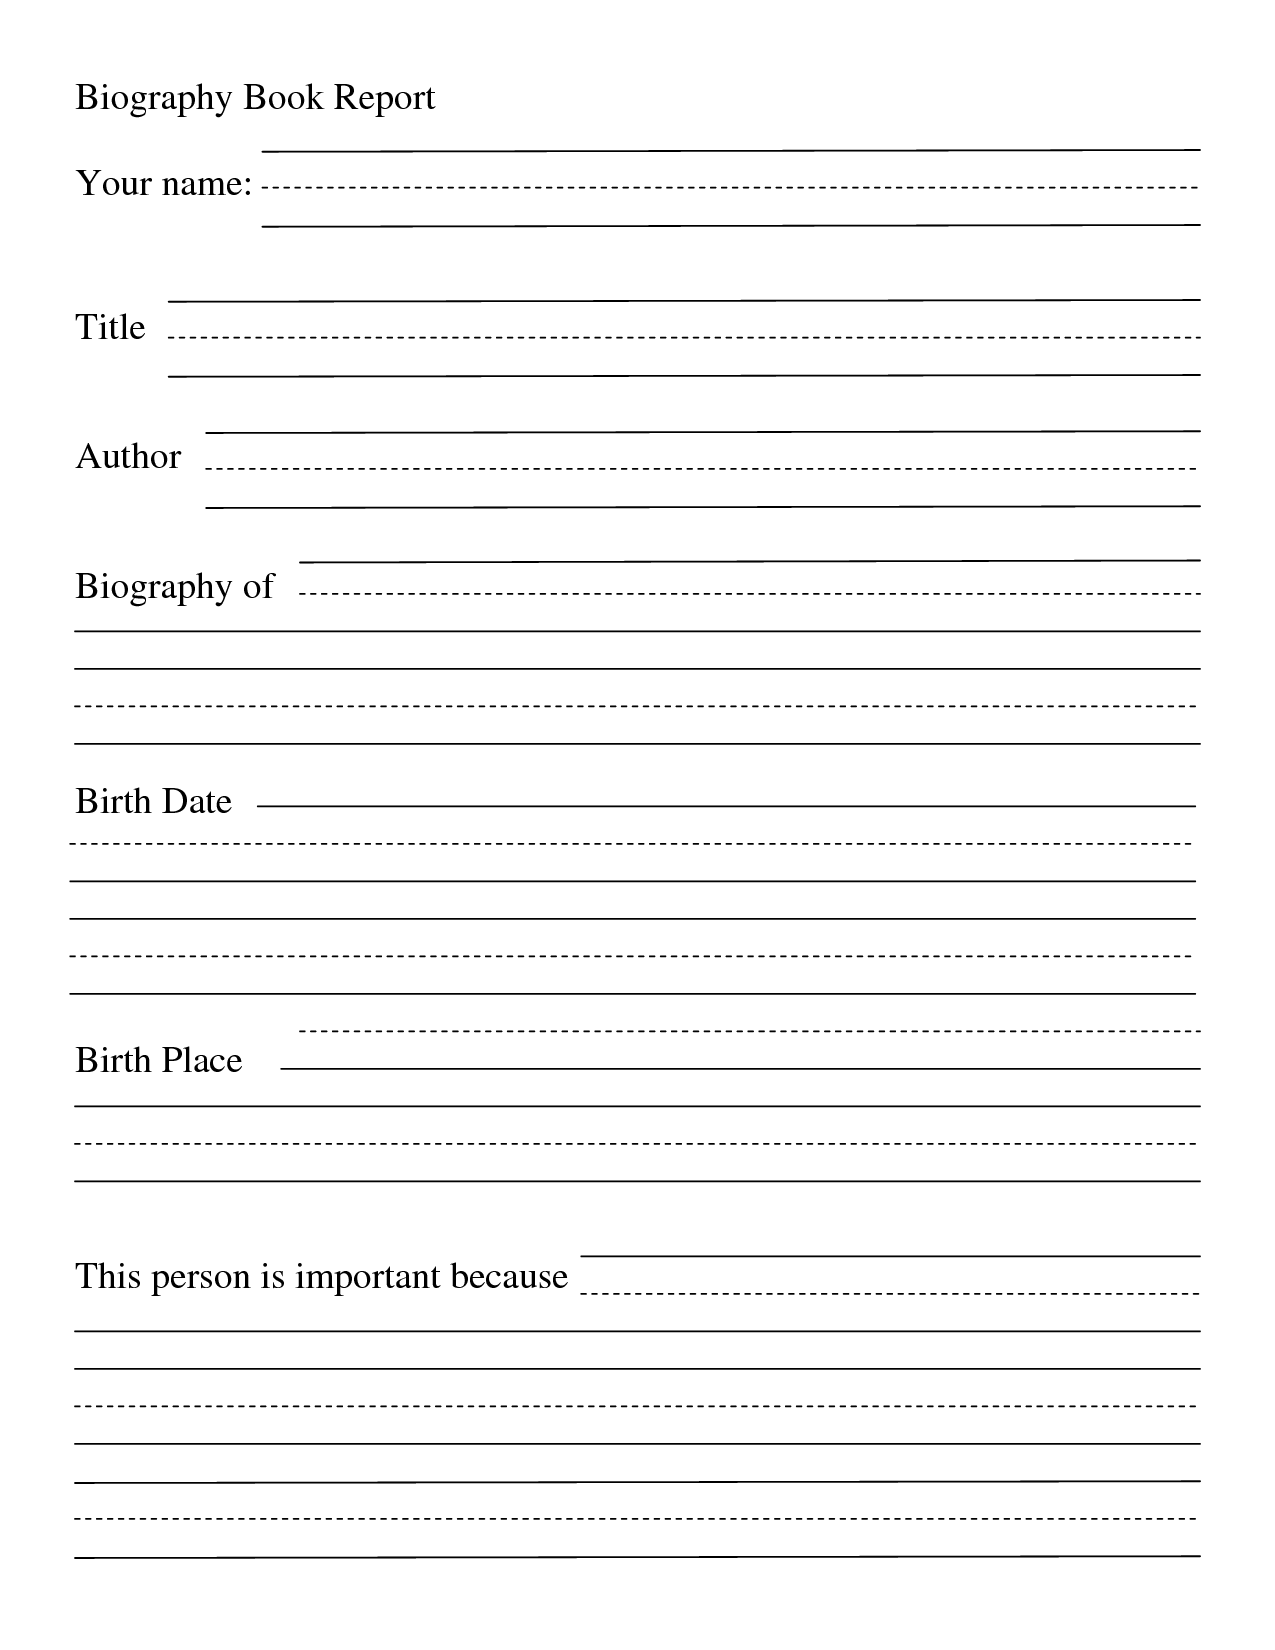 Outline for an elementary book report